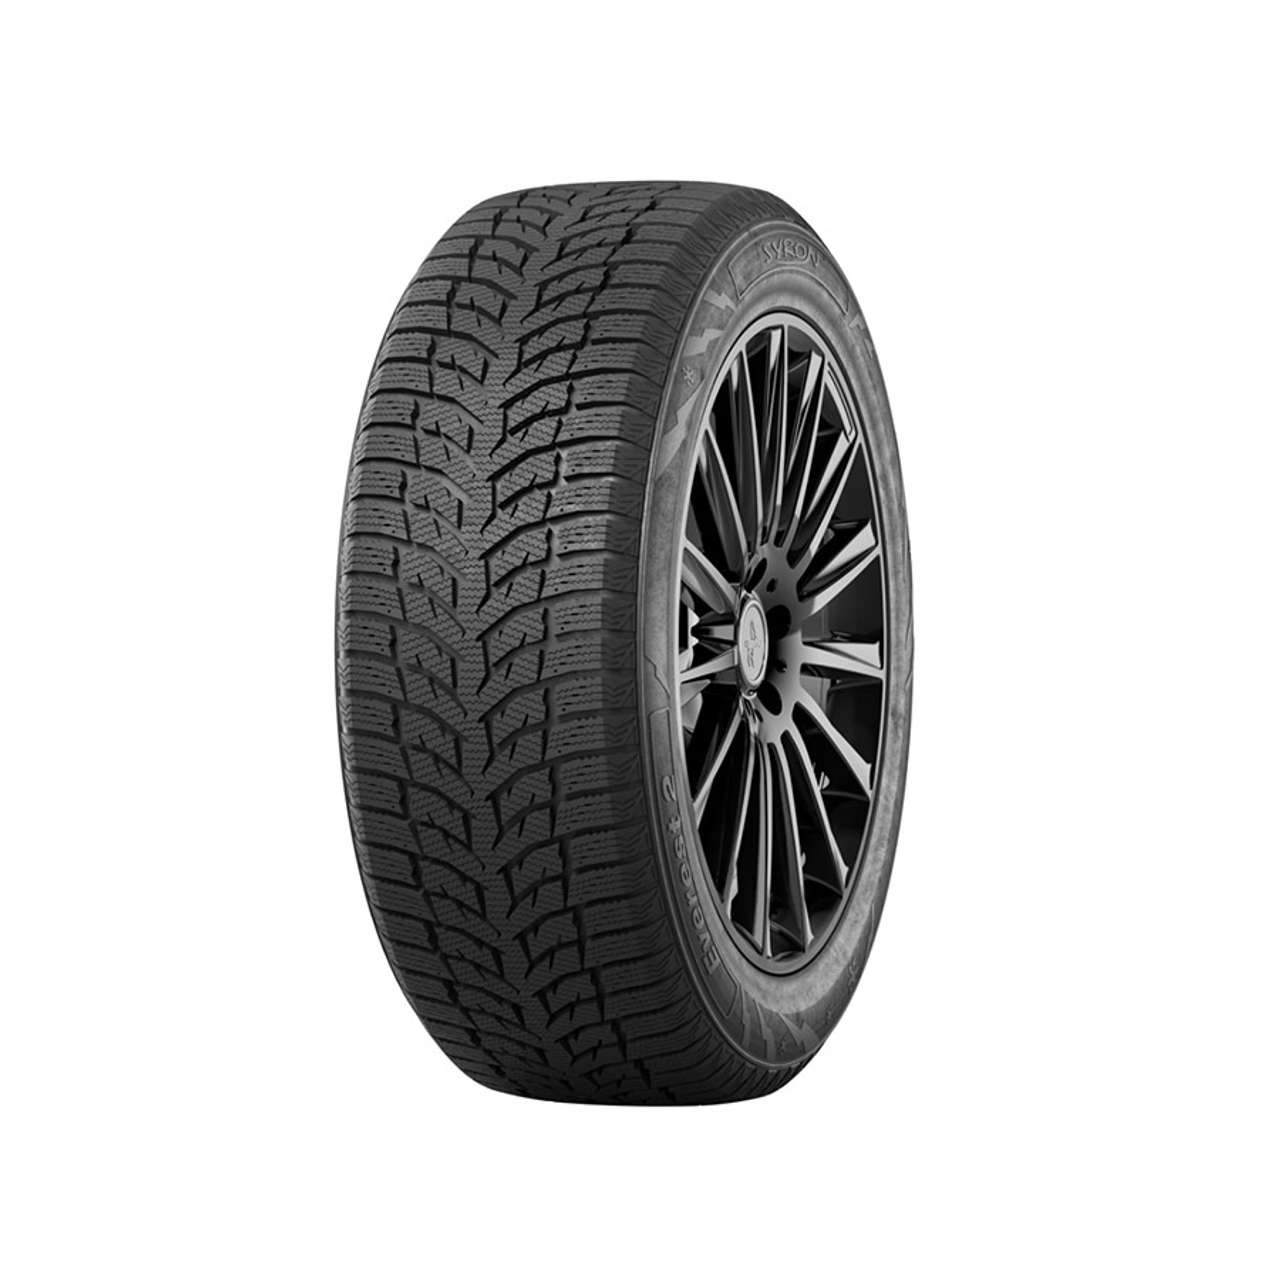 SYRON EVEREST 2 205/55R16 91T BSW